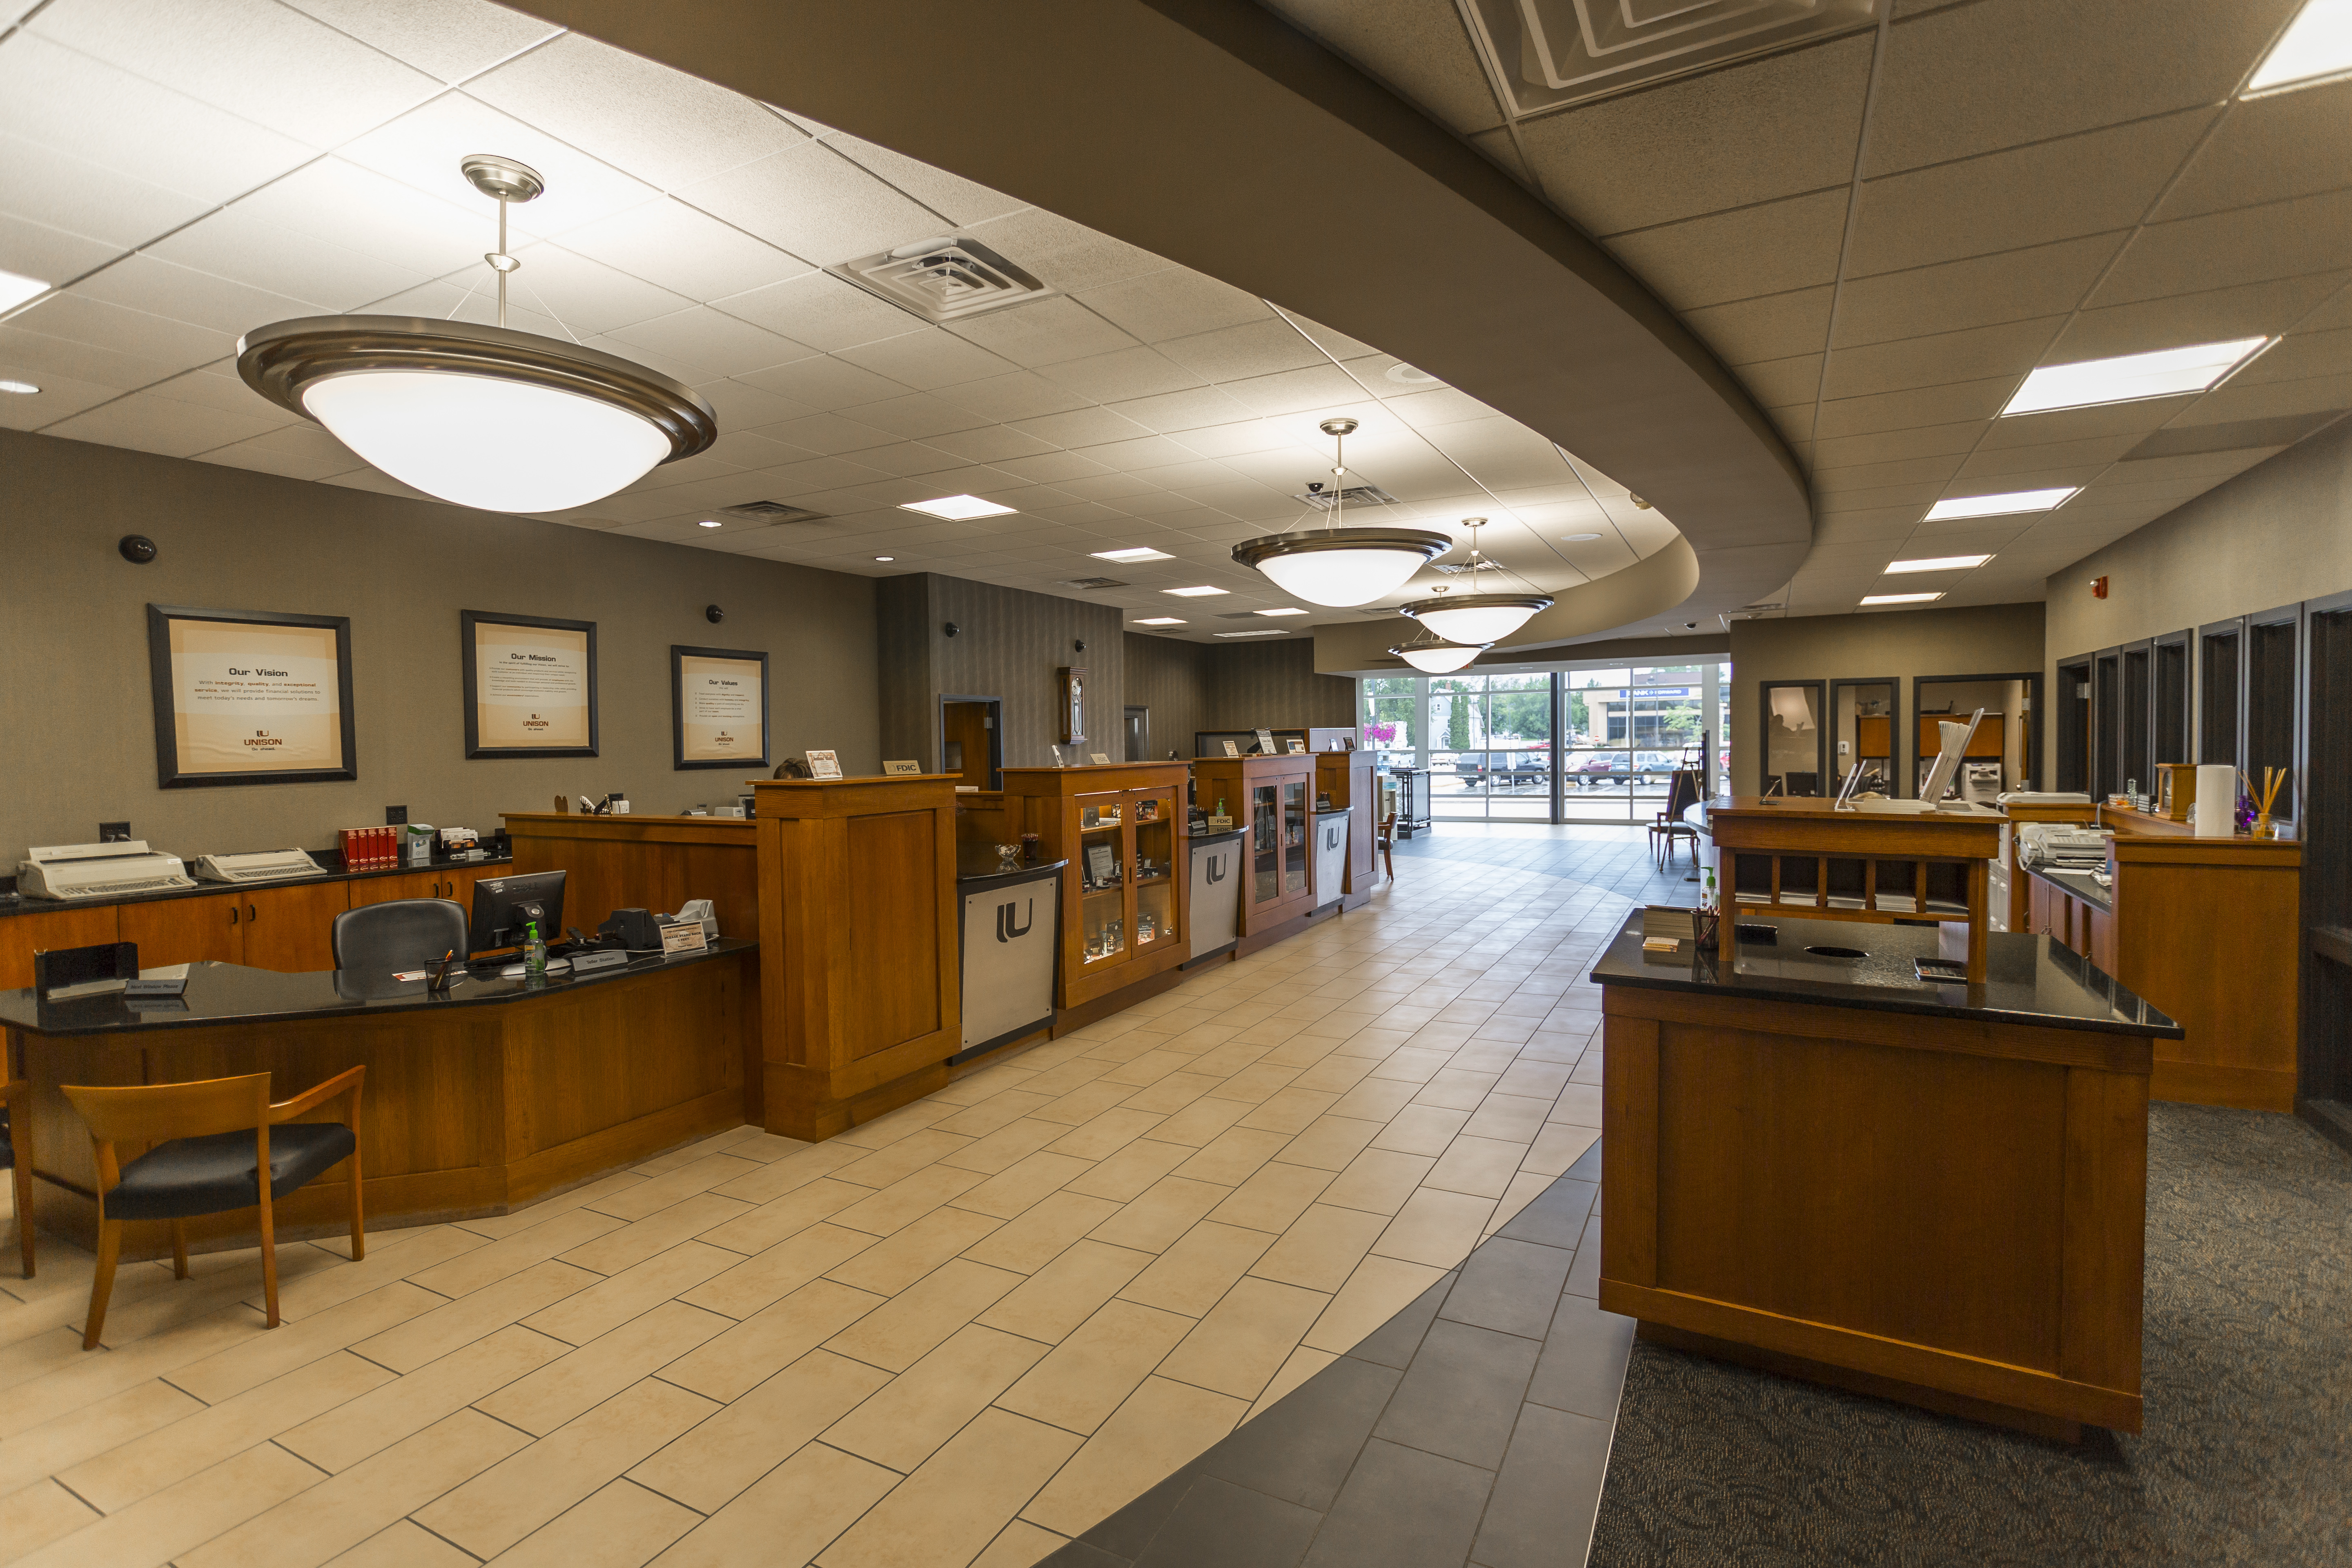 Interior image of the Unison Bank branch located in Jamestown, N.D.